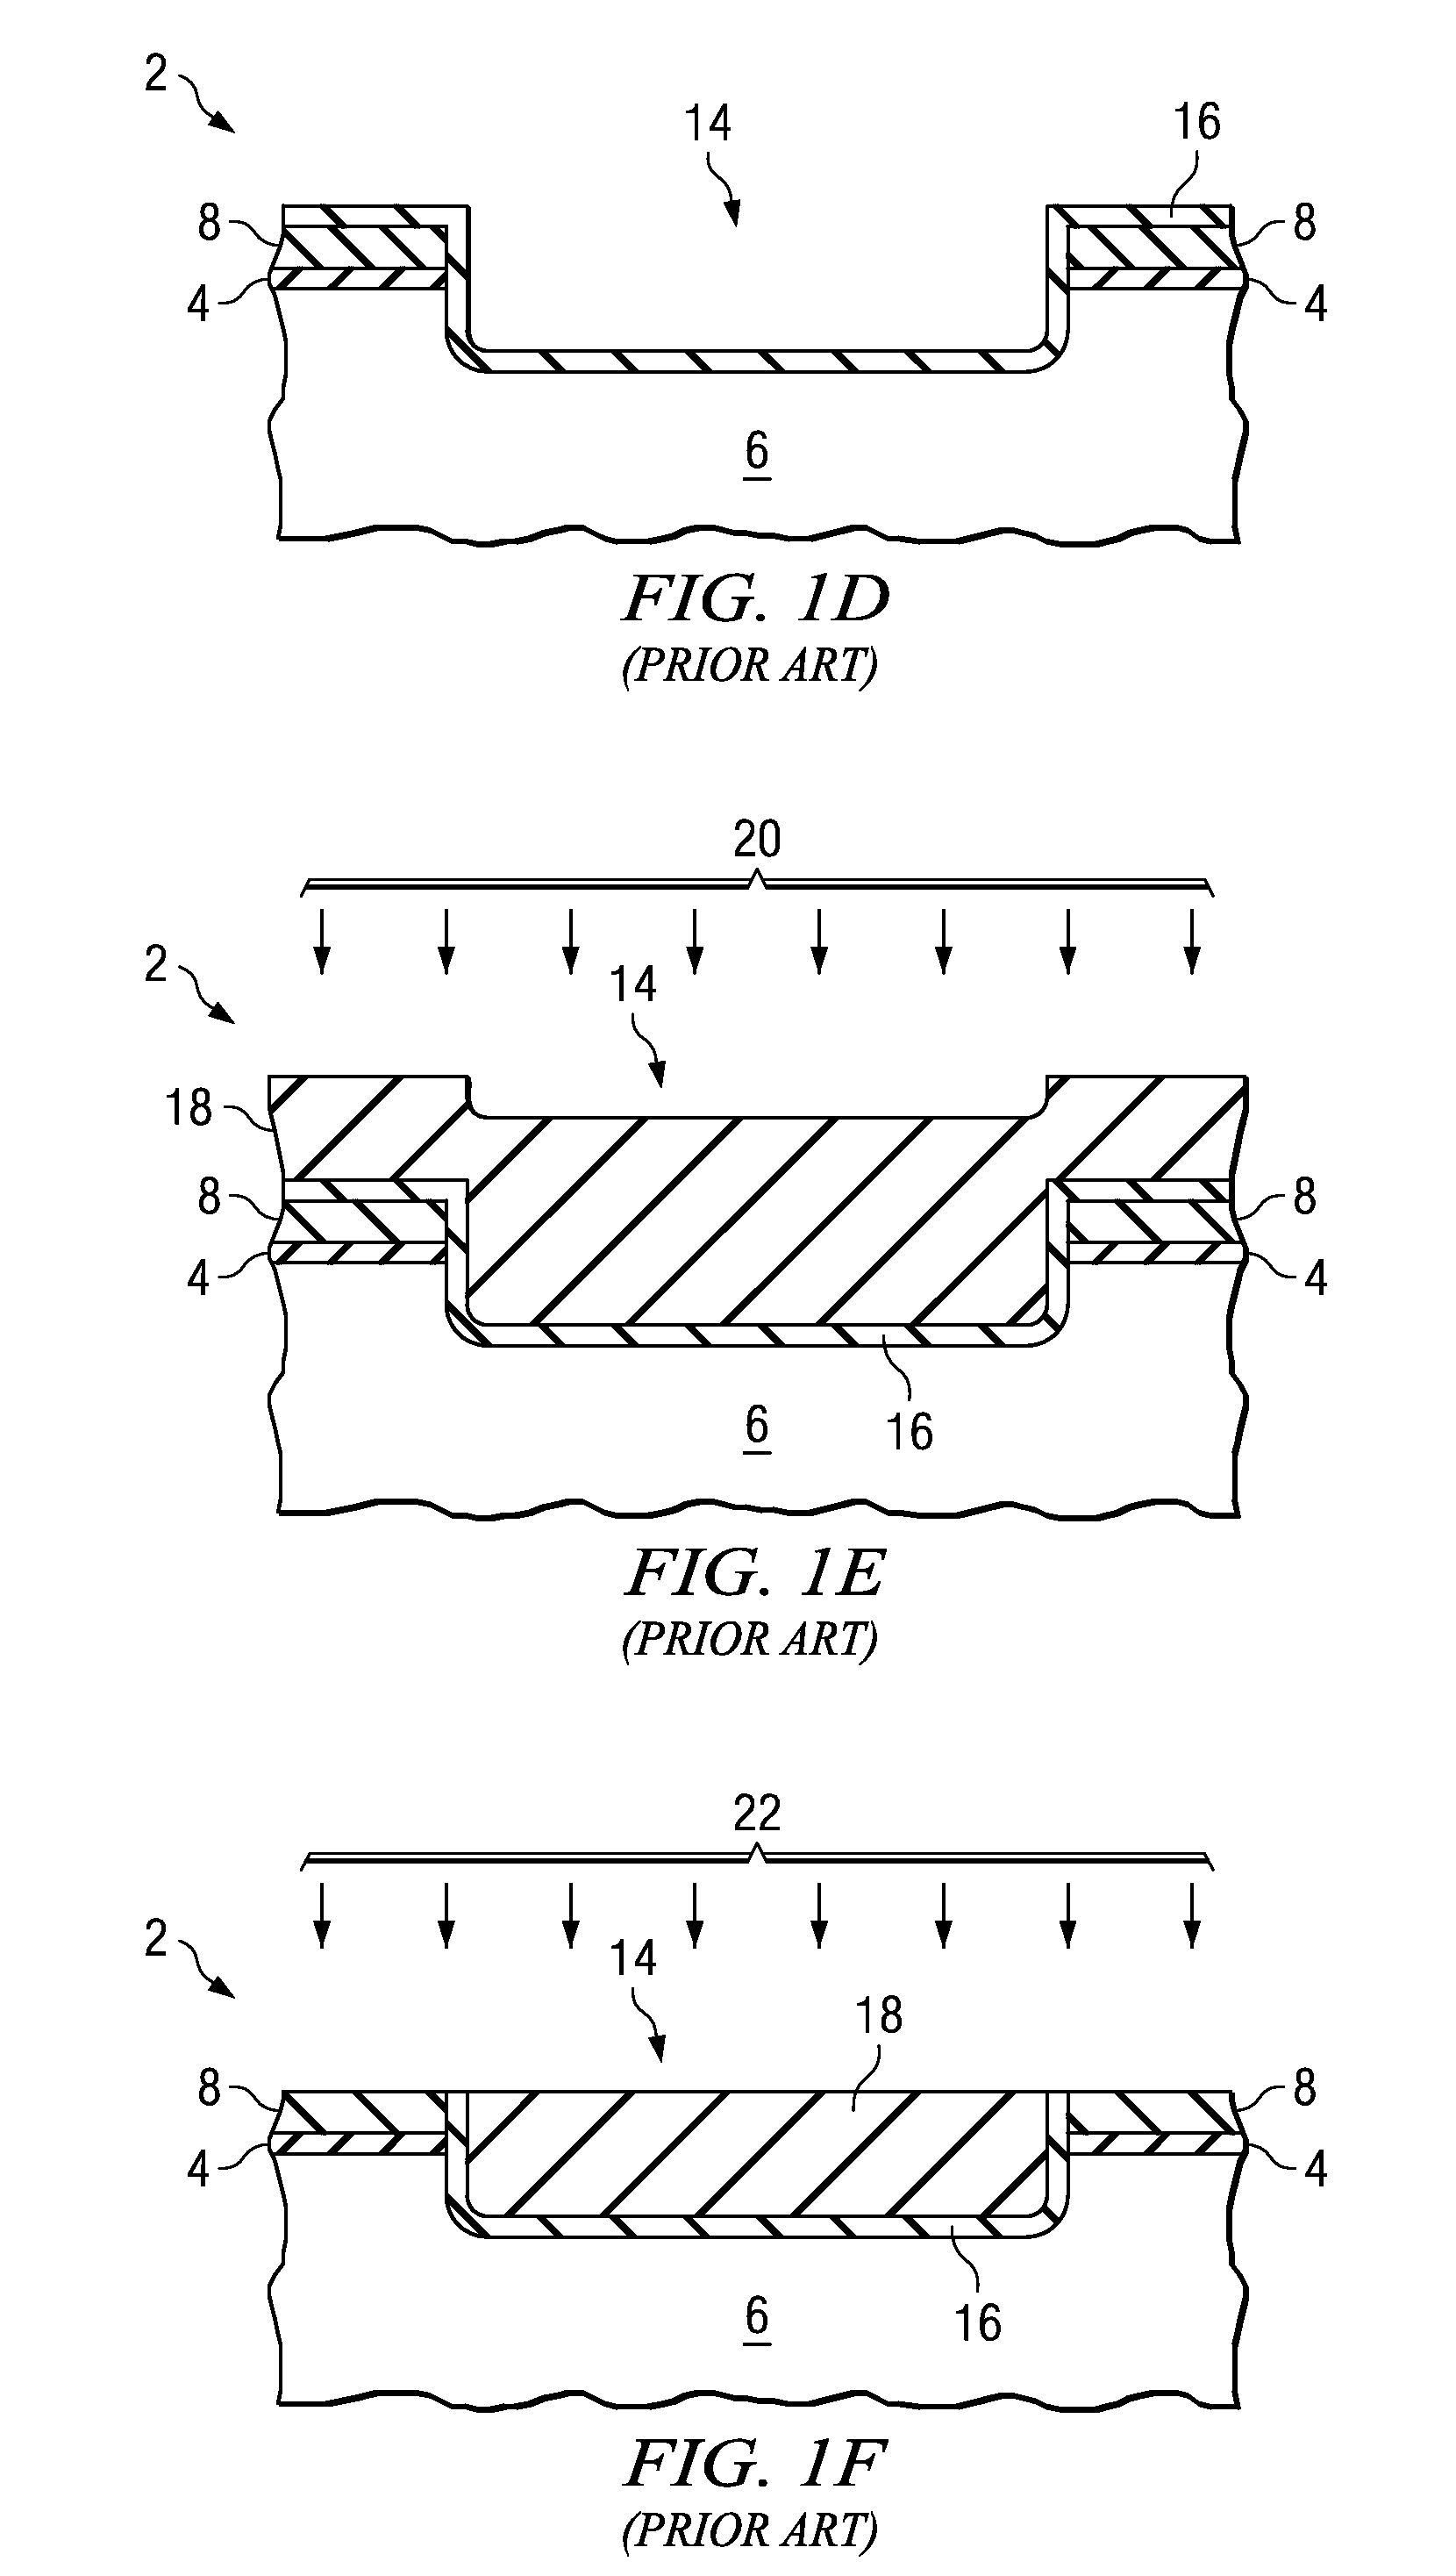 Highly selective liners for semiconductor fabrication